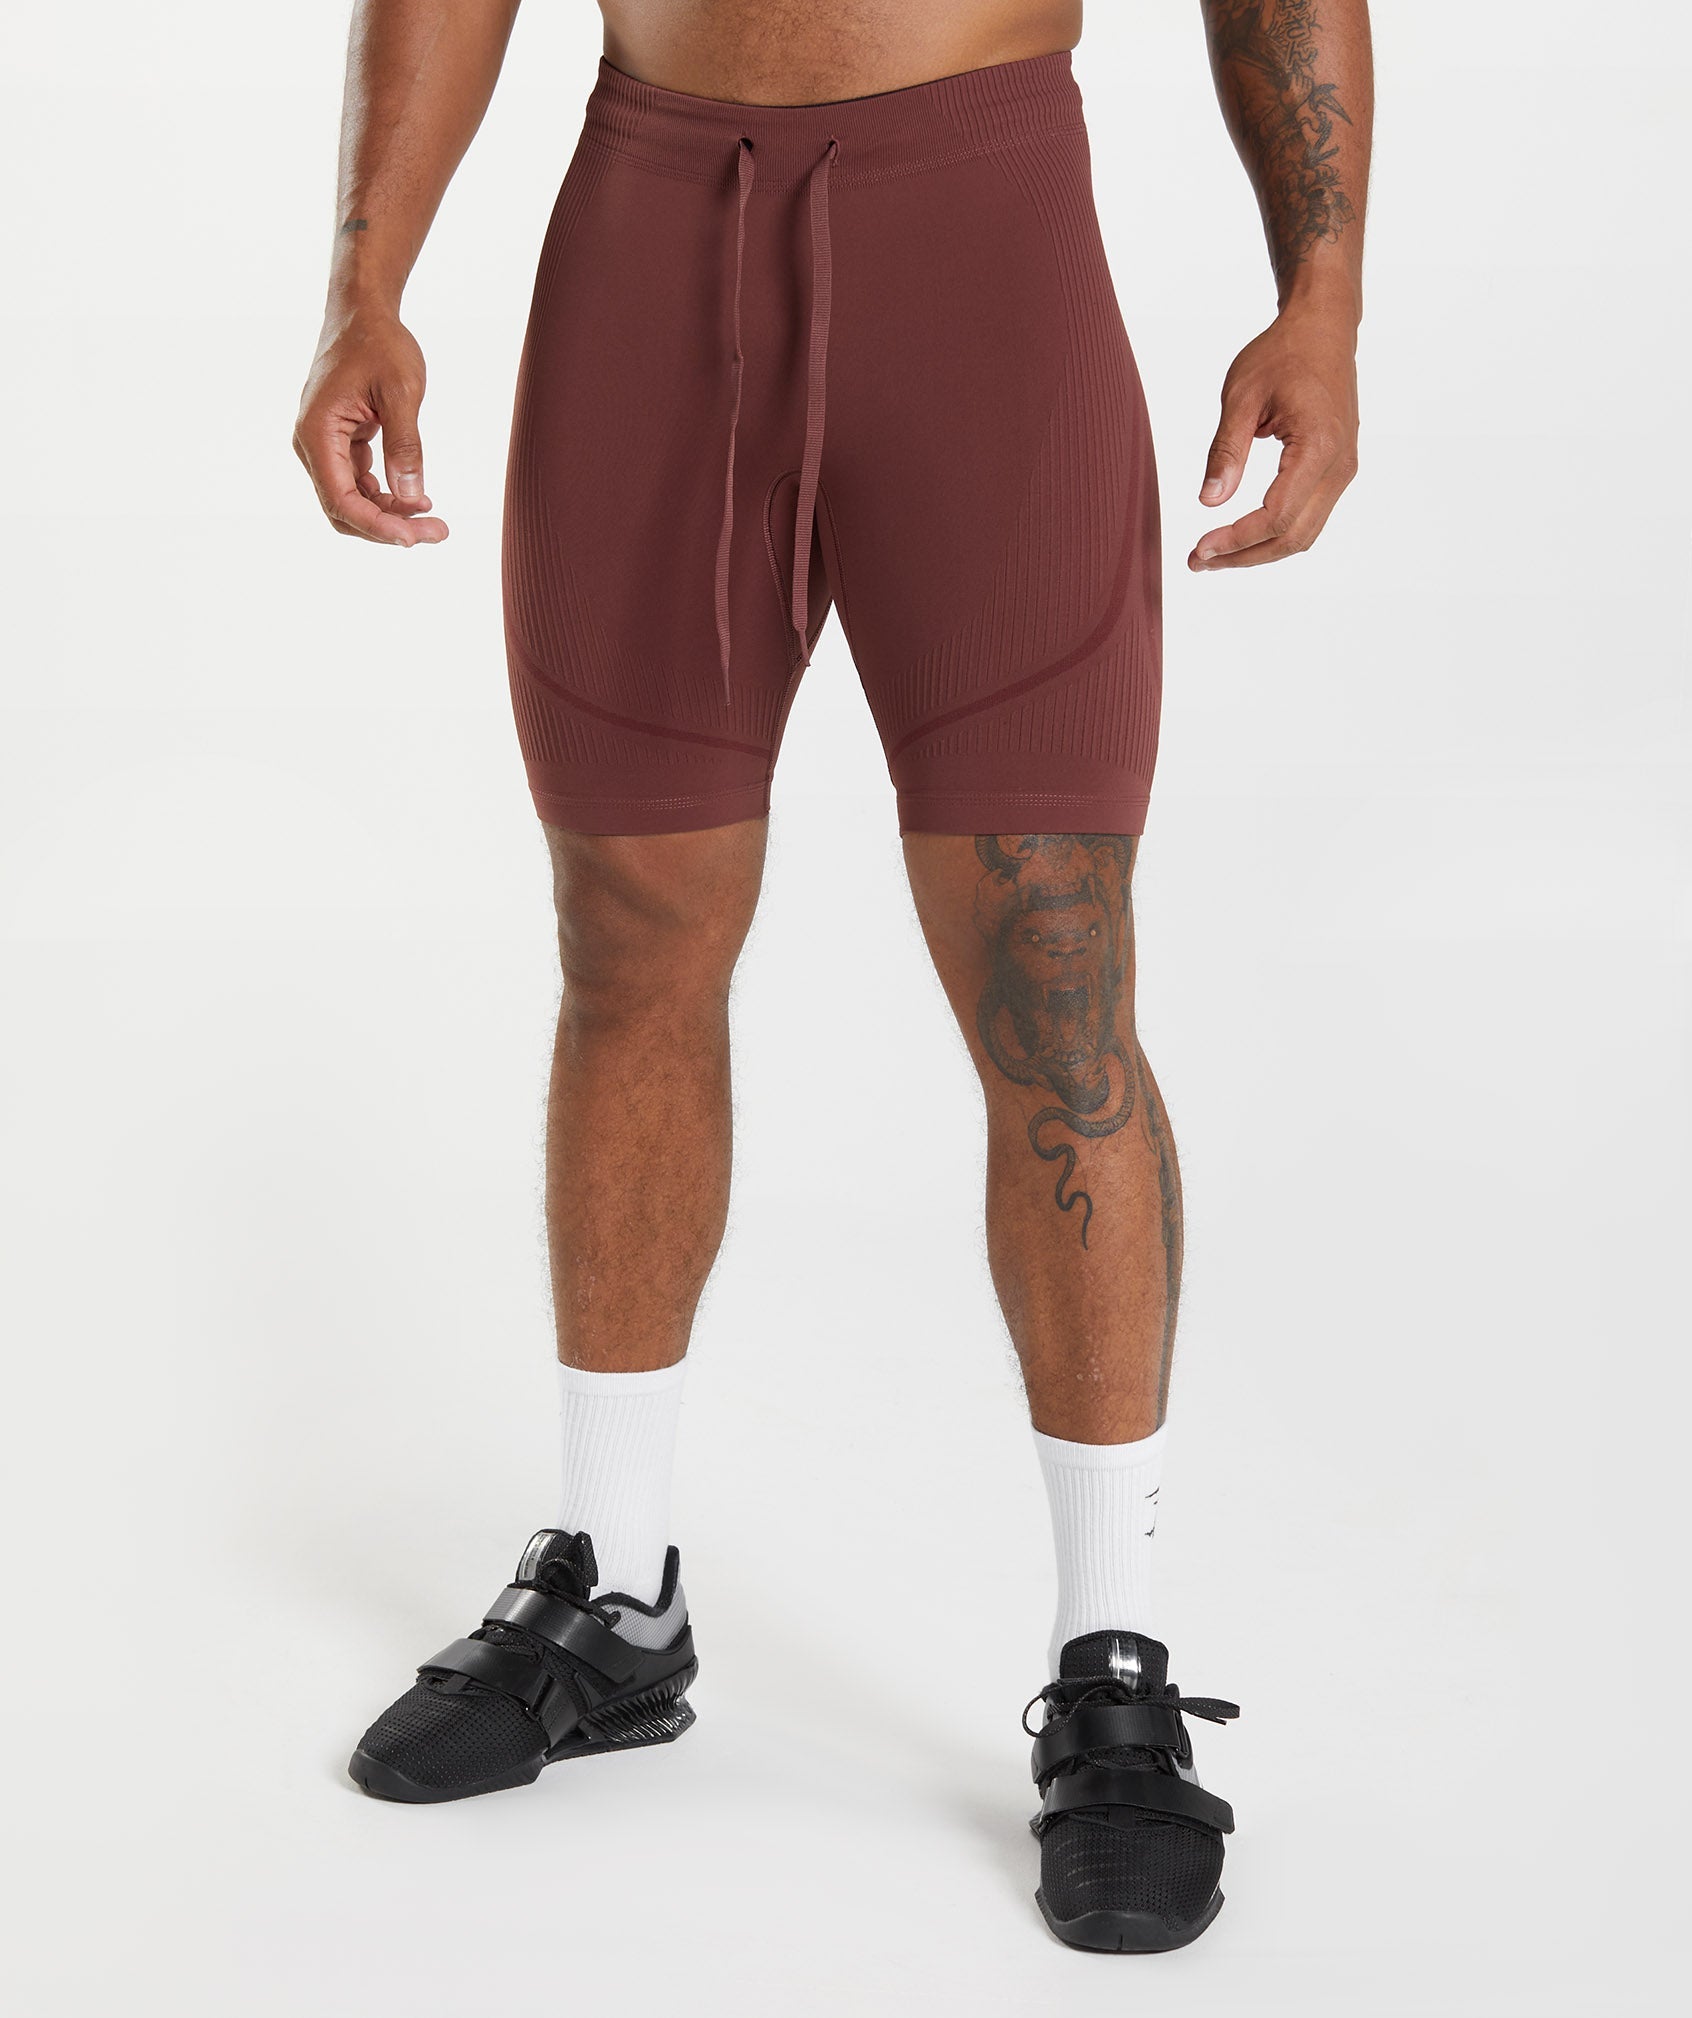 315 Seamless Shorts in Cherry Brown/Athletic Maroon